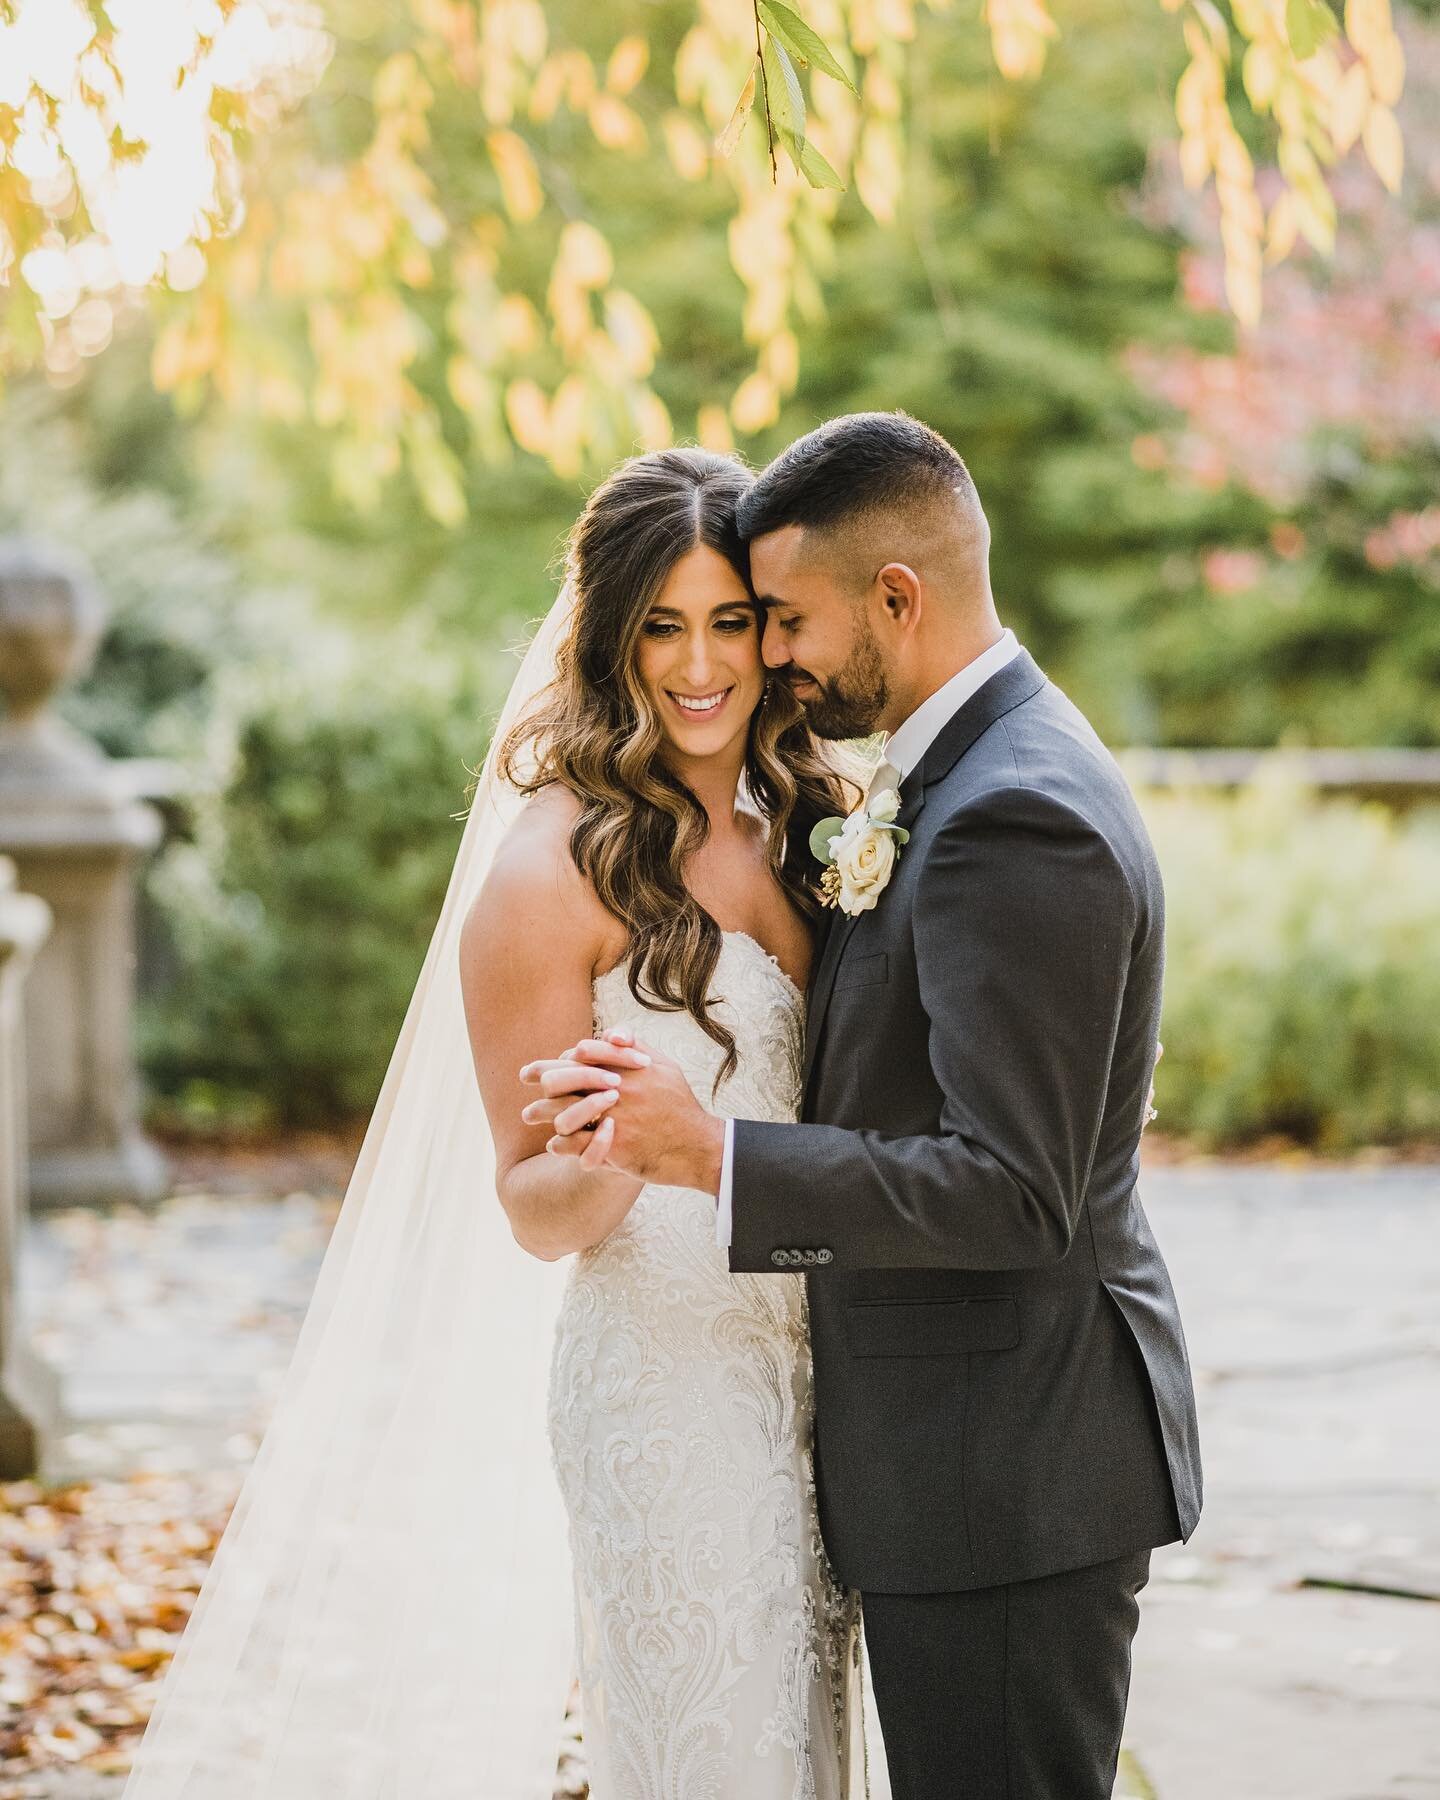 This weekend has been filled with so much love and beautiful fall weather!

Here is a little sneak peak into Kristina + Jonathan&rsquo;s wedding day✨🍂